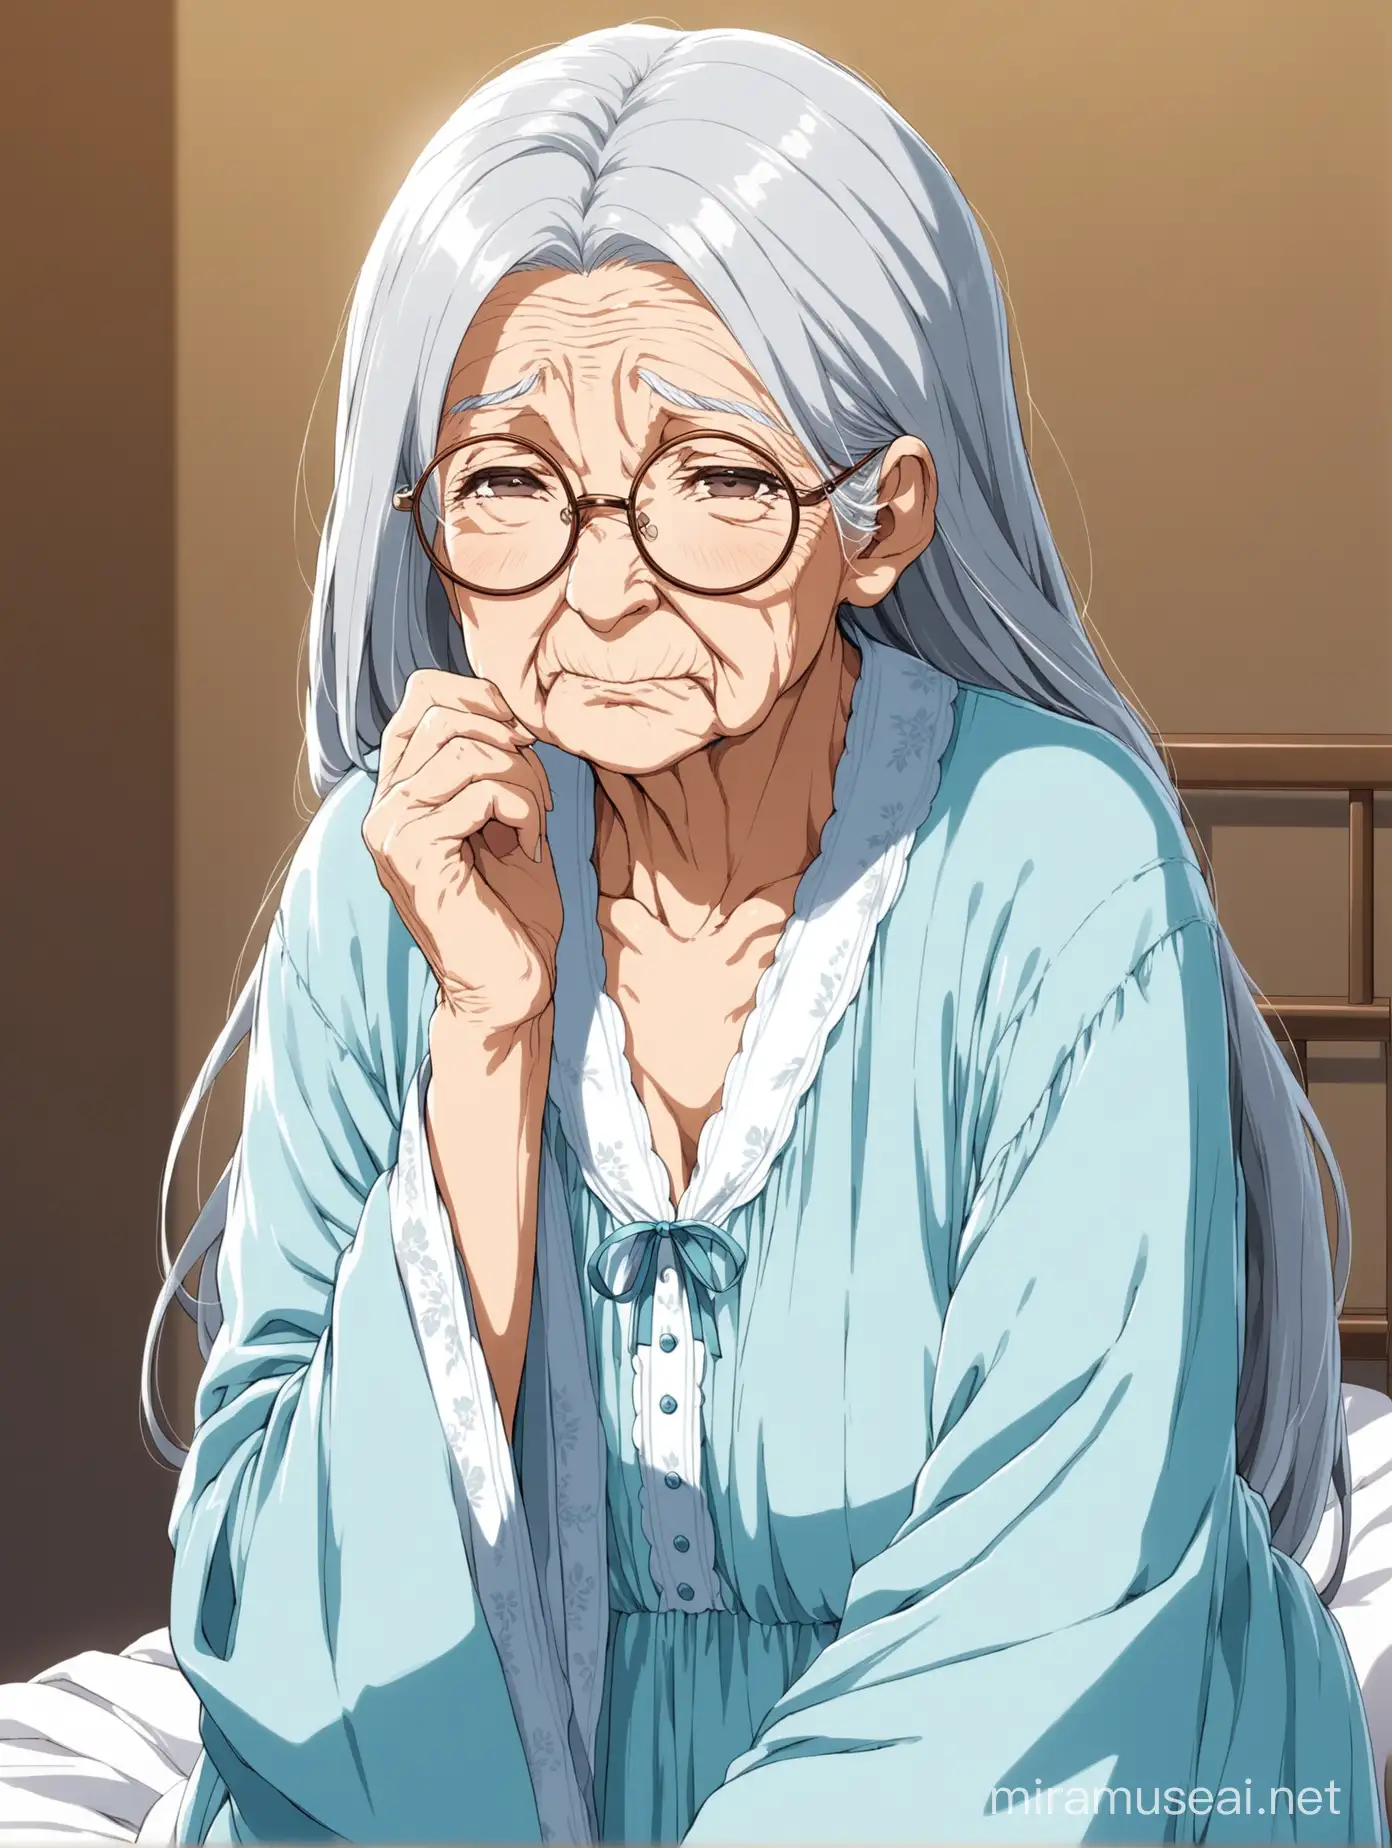 Anime Elderly Woman Character with Long Gray Hair and Round Glasses in Light Blue Nightgown and White Shawl